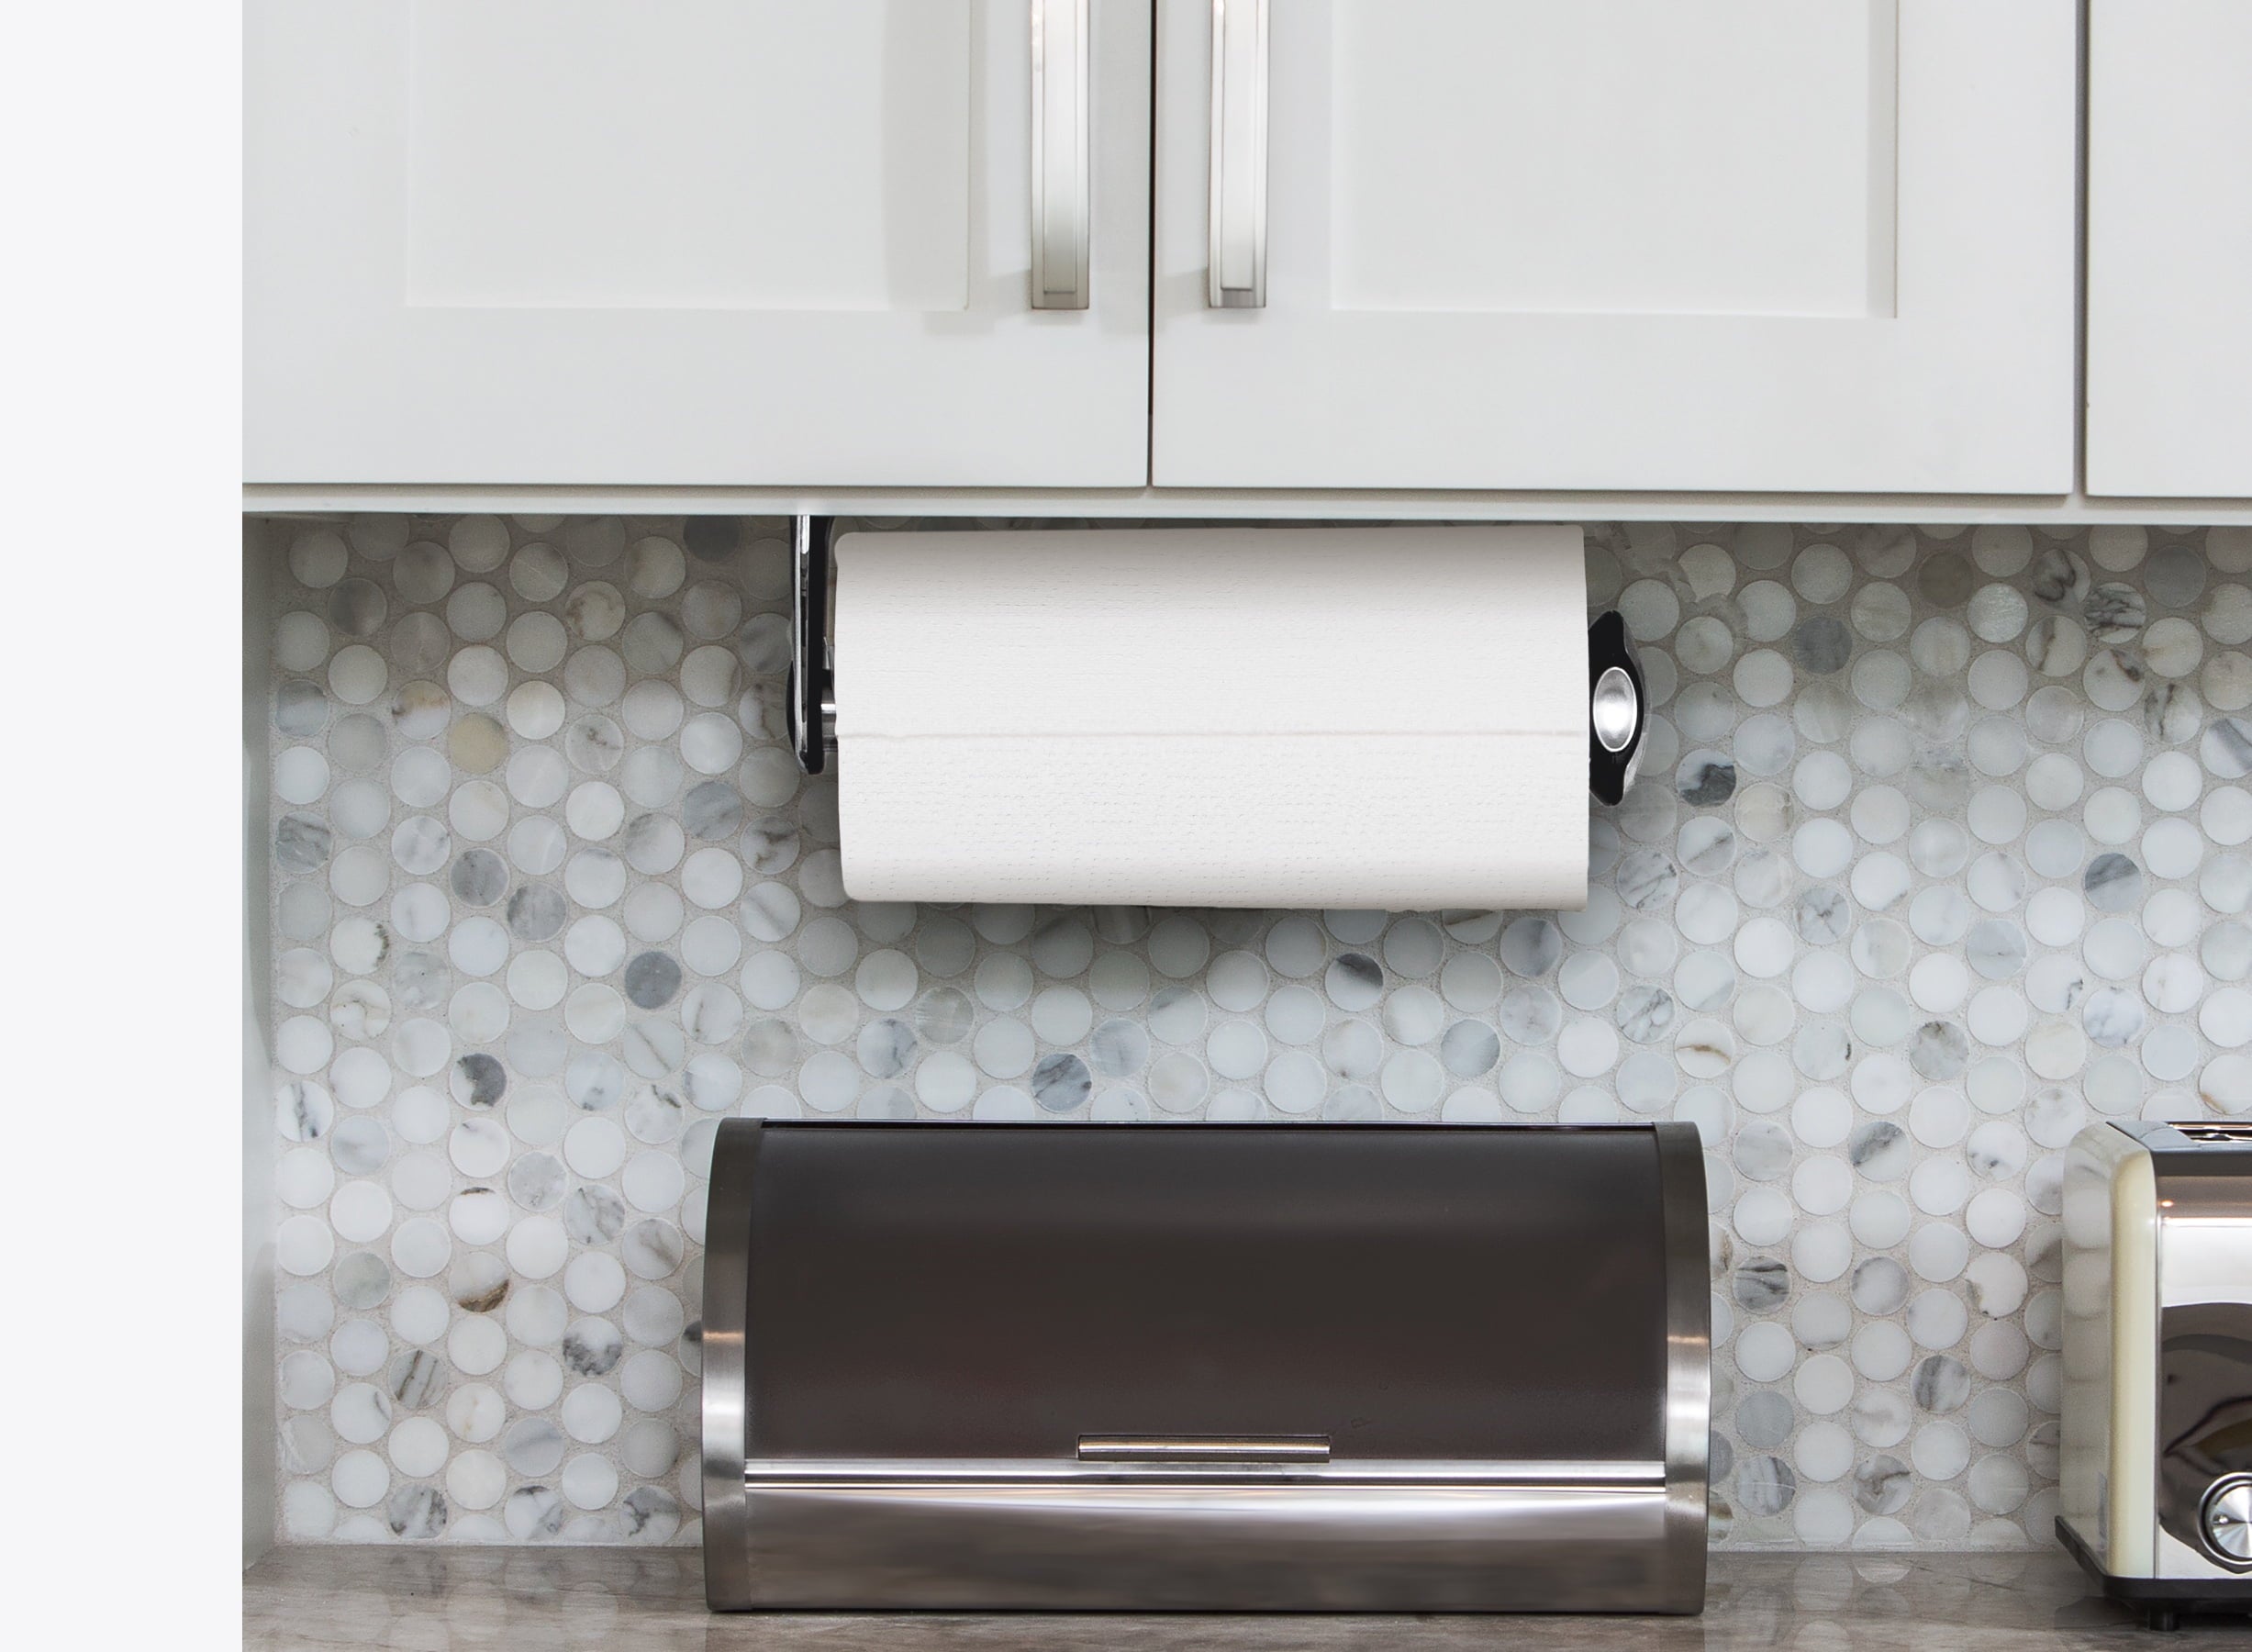 Reduce Clutter With Simplehuman's New Paper Towel Pump – SPY